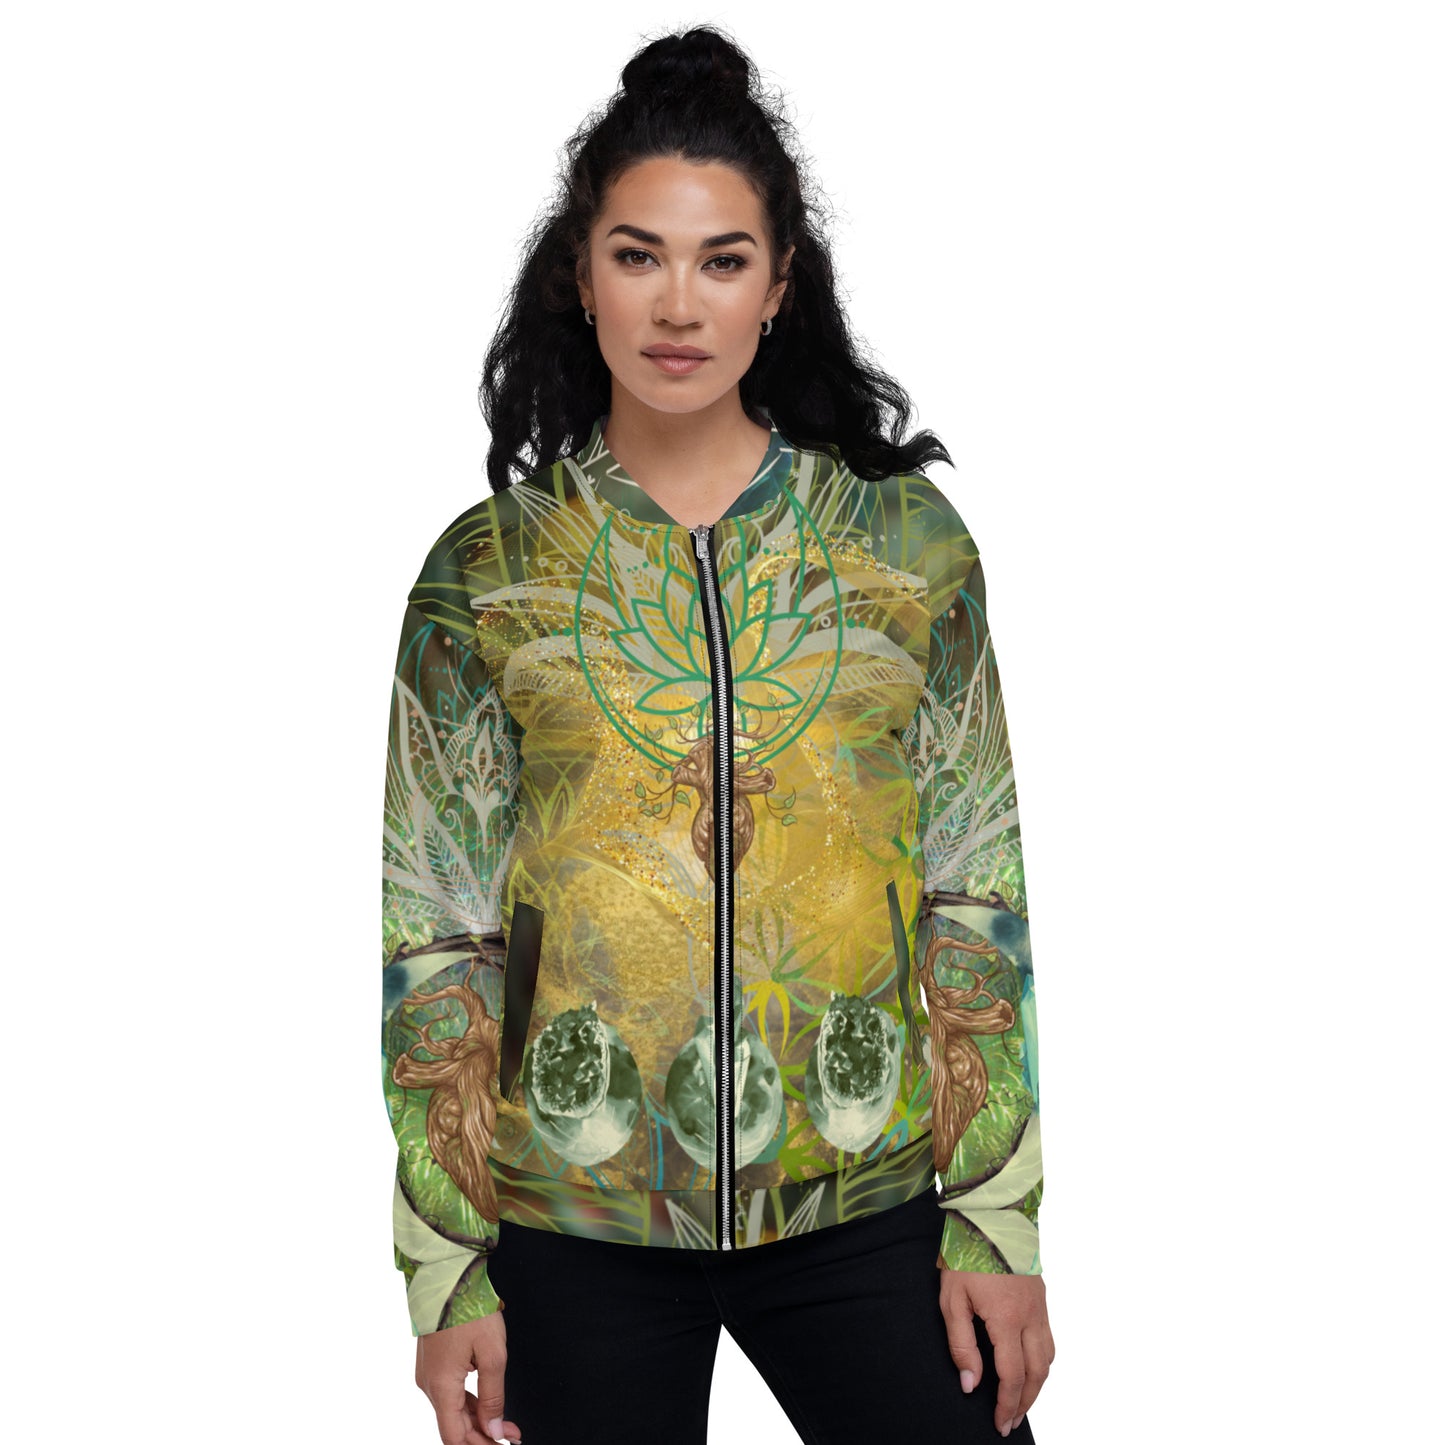 Geode Flower Of Life Abstract Print Psychedelic Festival Rave All Over Print UNISEX BOMBER JACKET